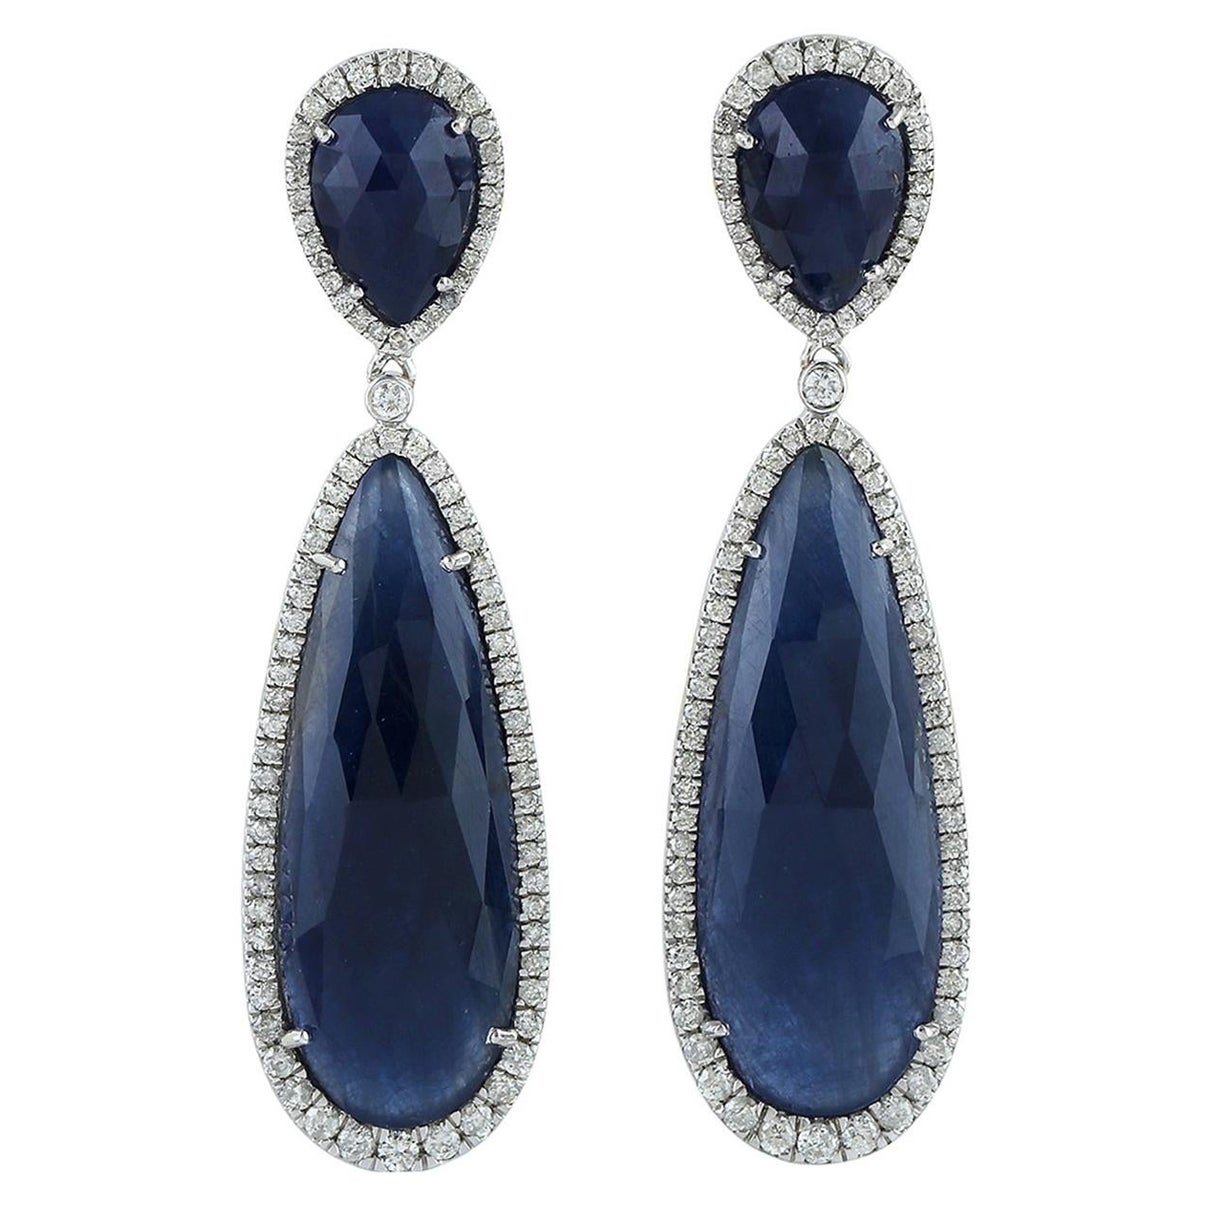 Two-Tier Sliced Sapphire and Diamond Dangle Earring Made In 18k White Gold